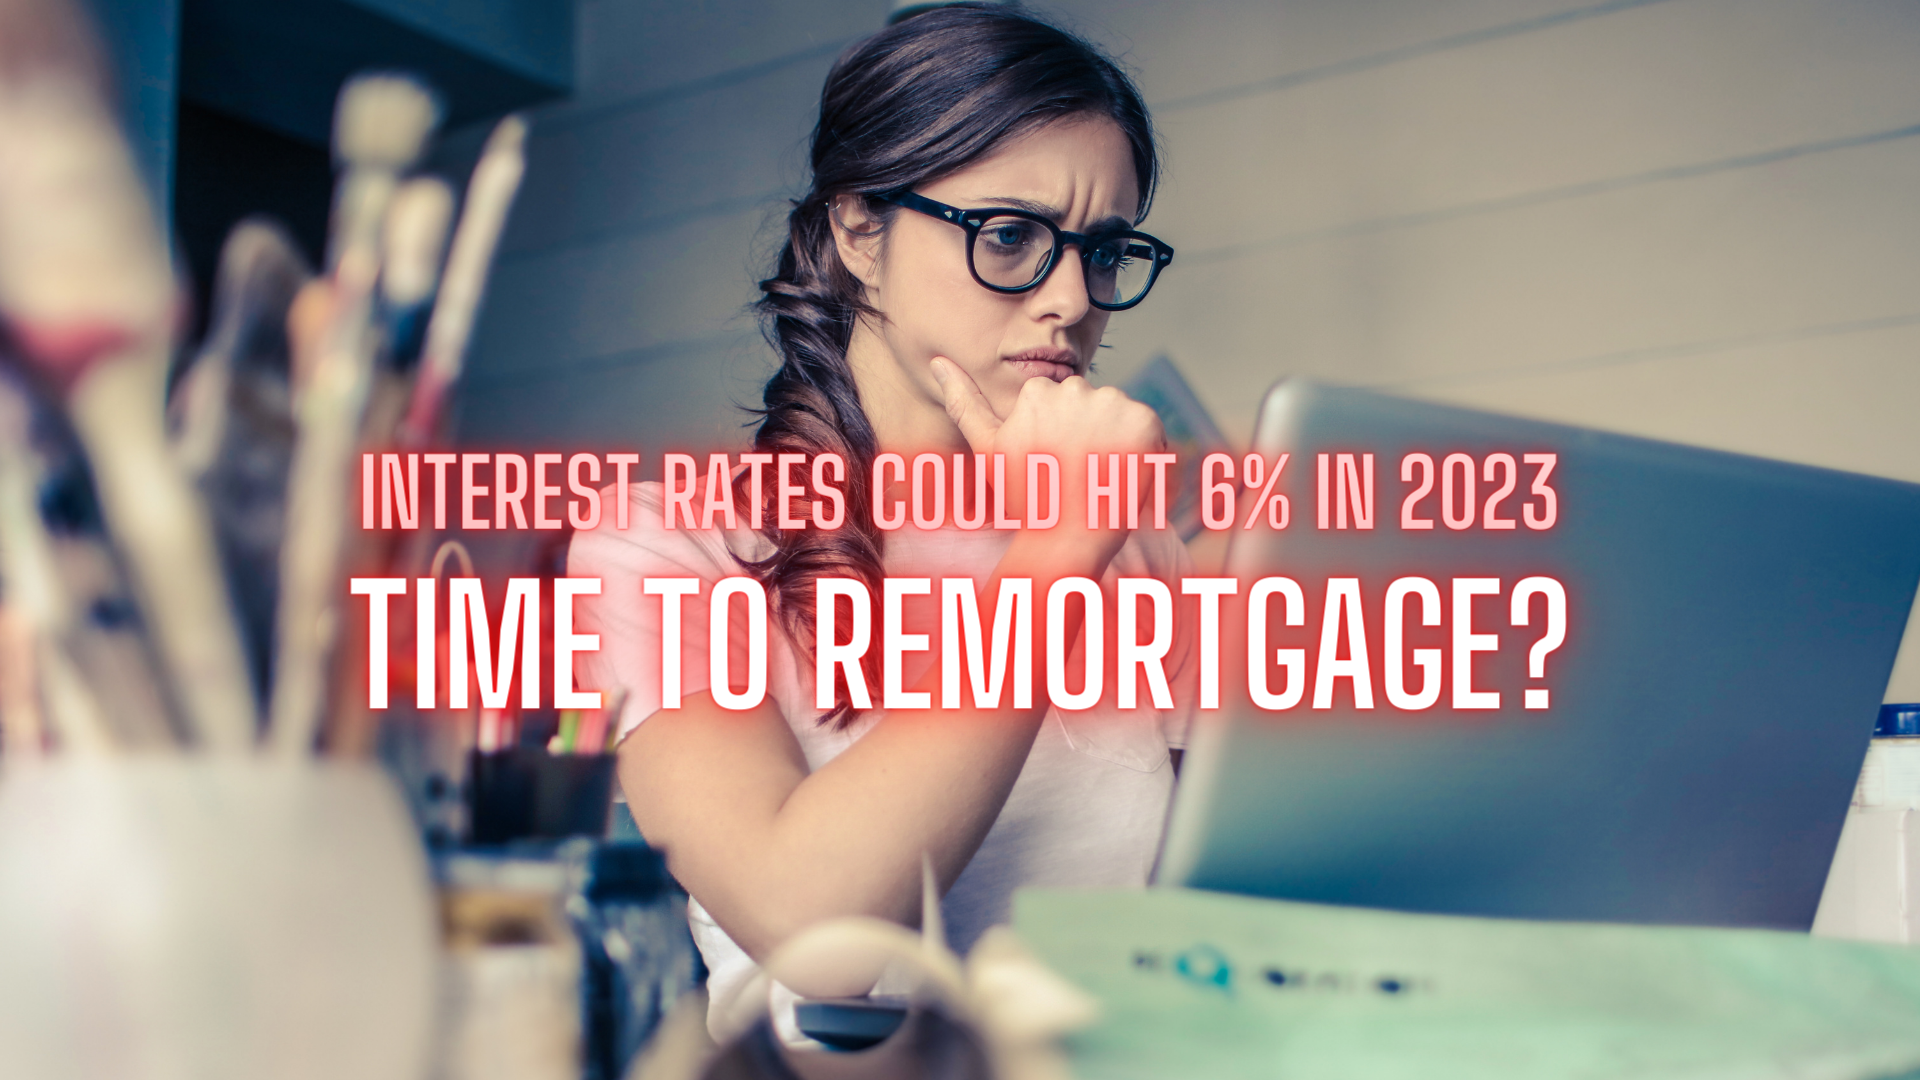 Interest Rates Could Hit 6% In 2023. Time To Remortgage?